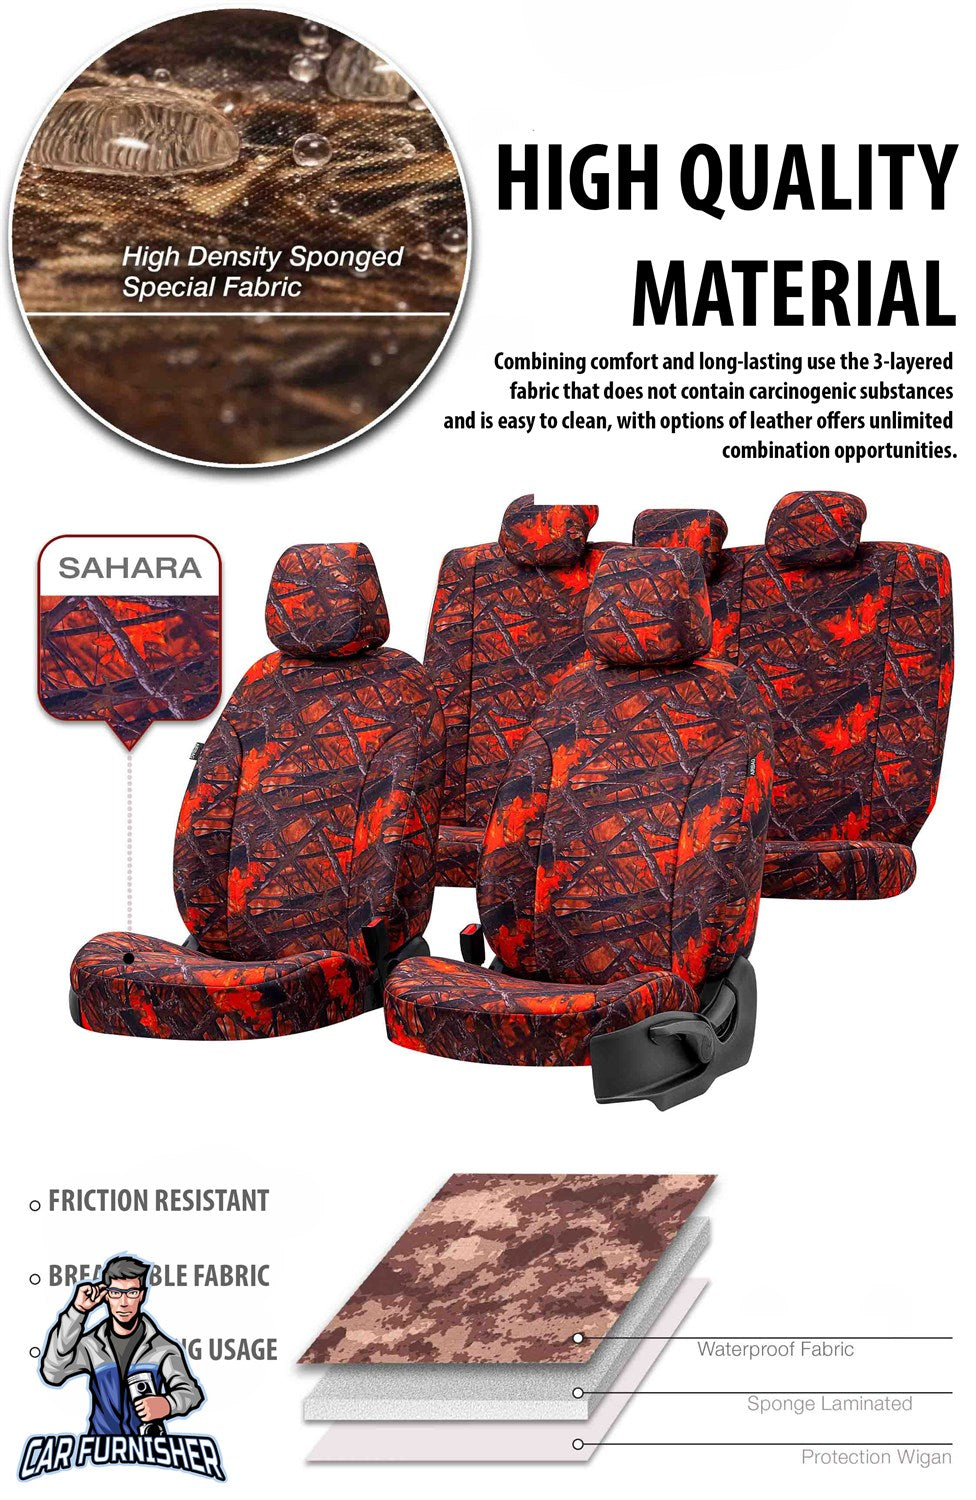 Toyota Camry Seat Cover Camouflage Waterproof Design Alps Camo Waterproof Fabric